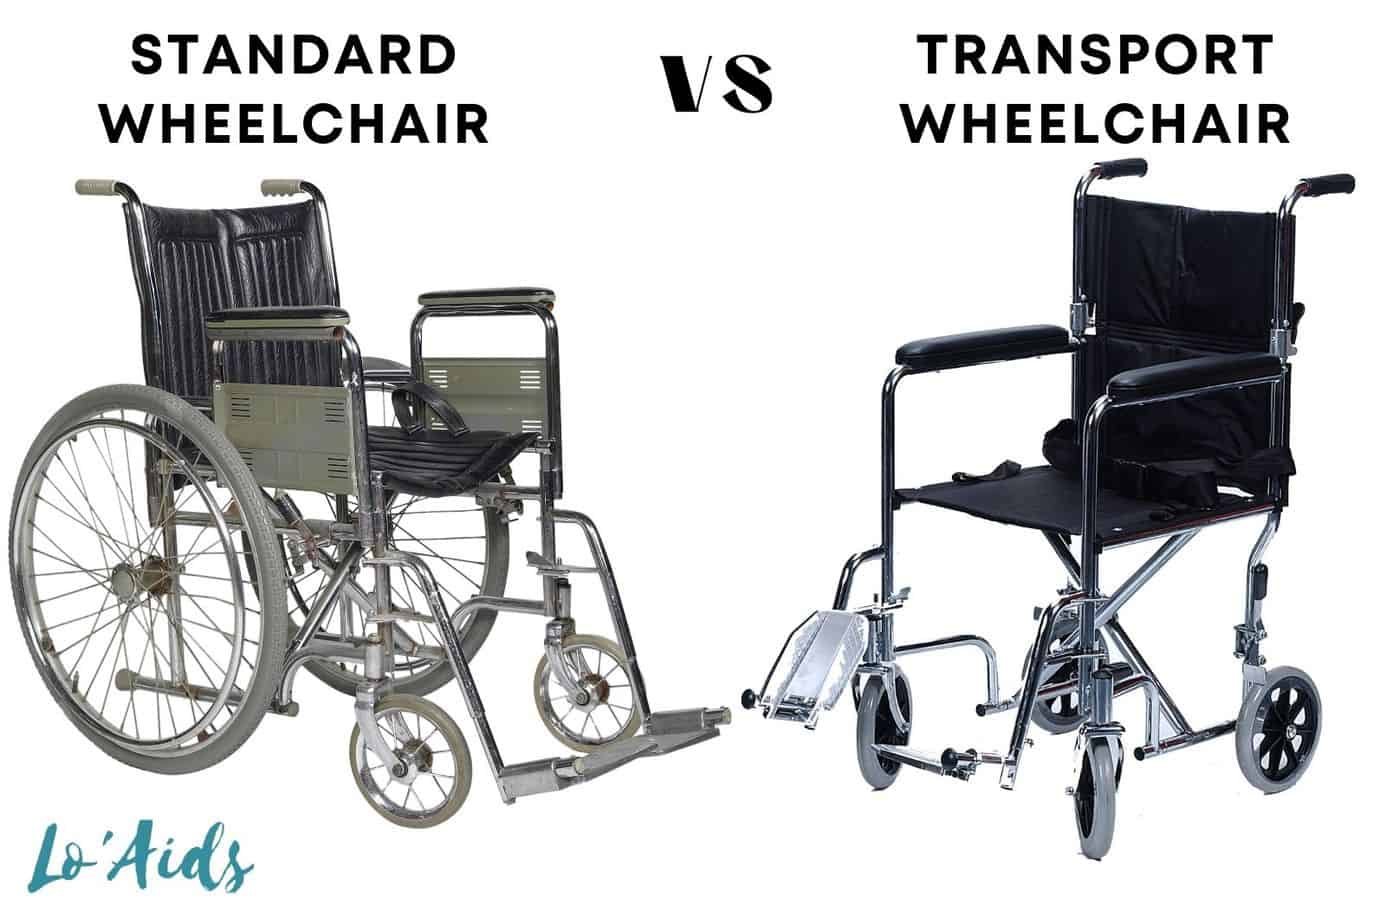 two wheelchairs: what is the difference between a wheelchair and a transport wheelchair